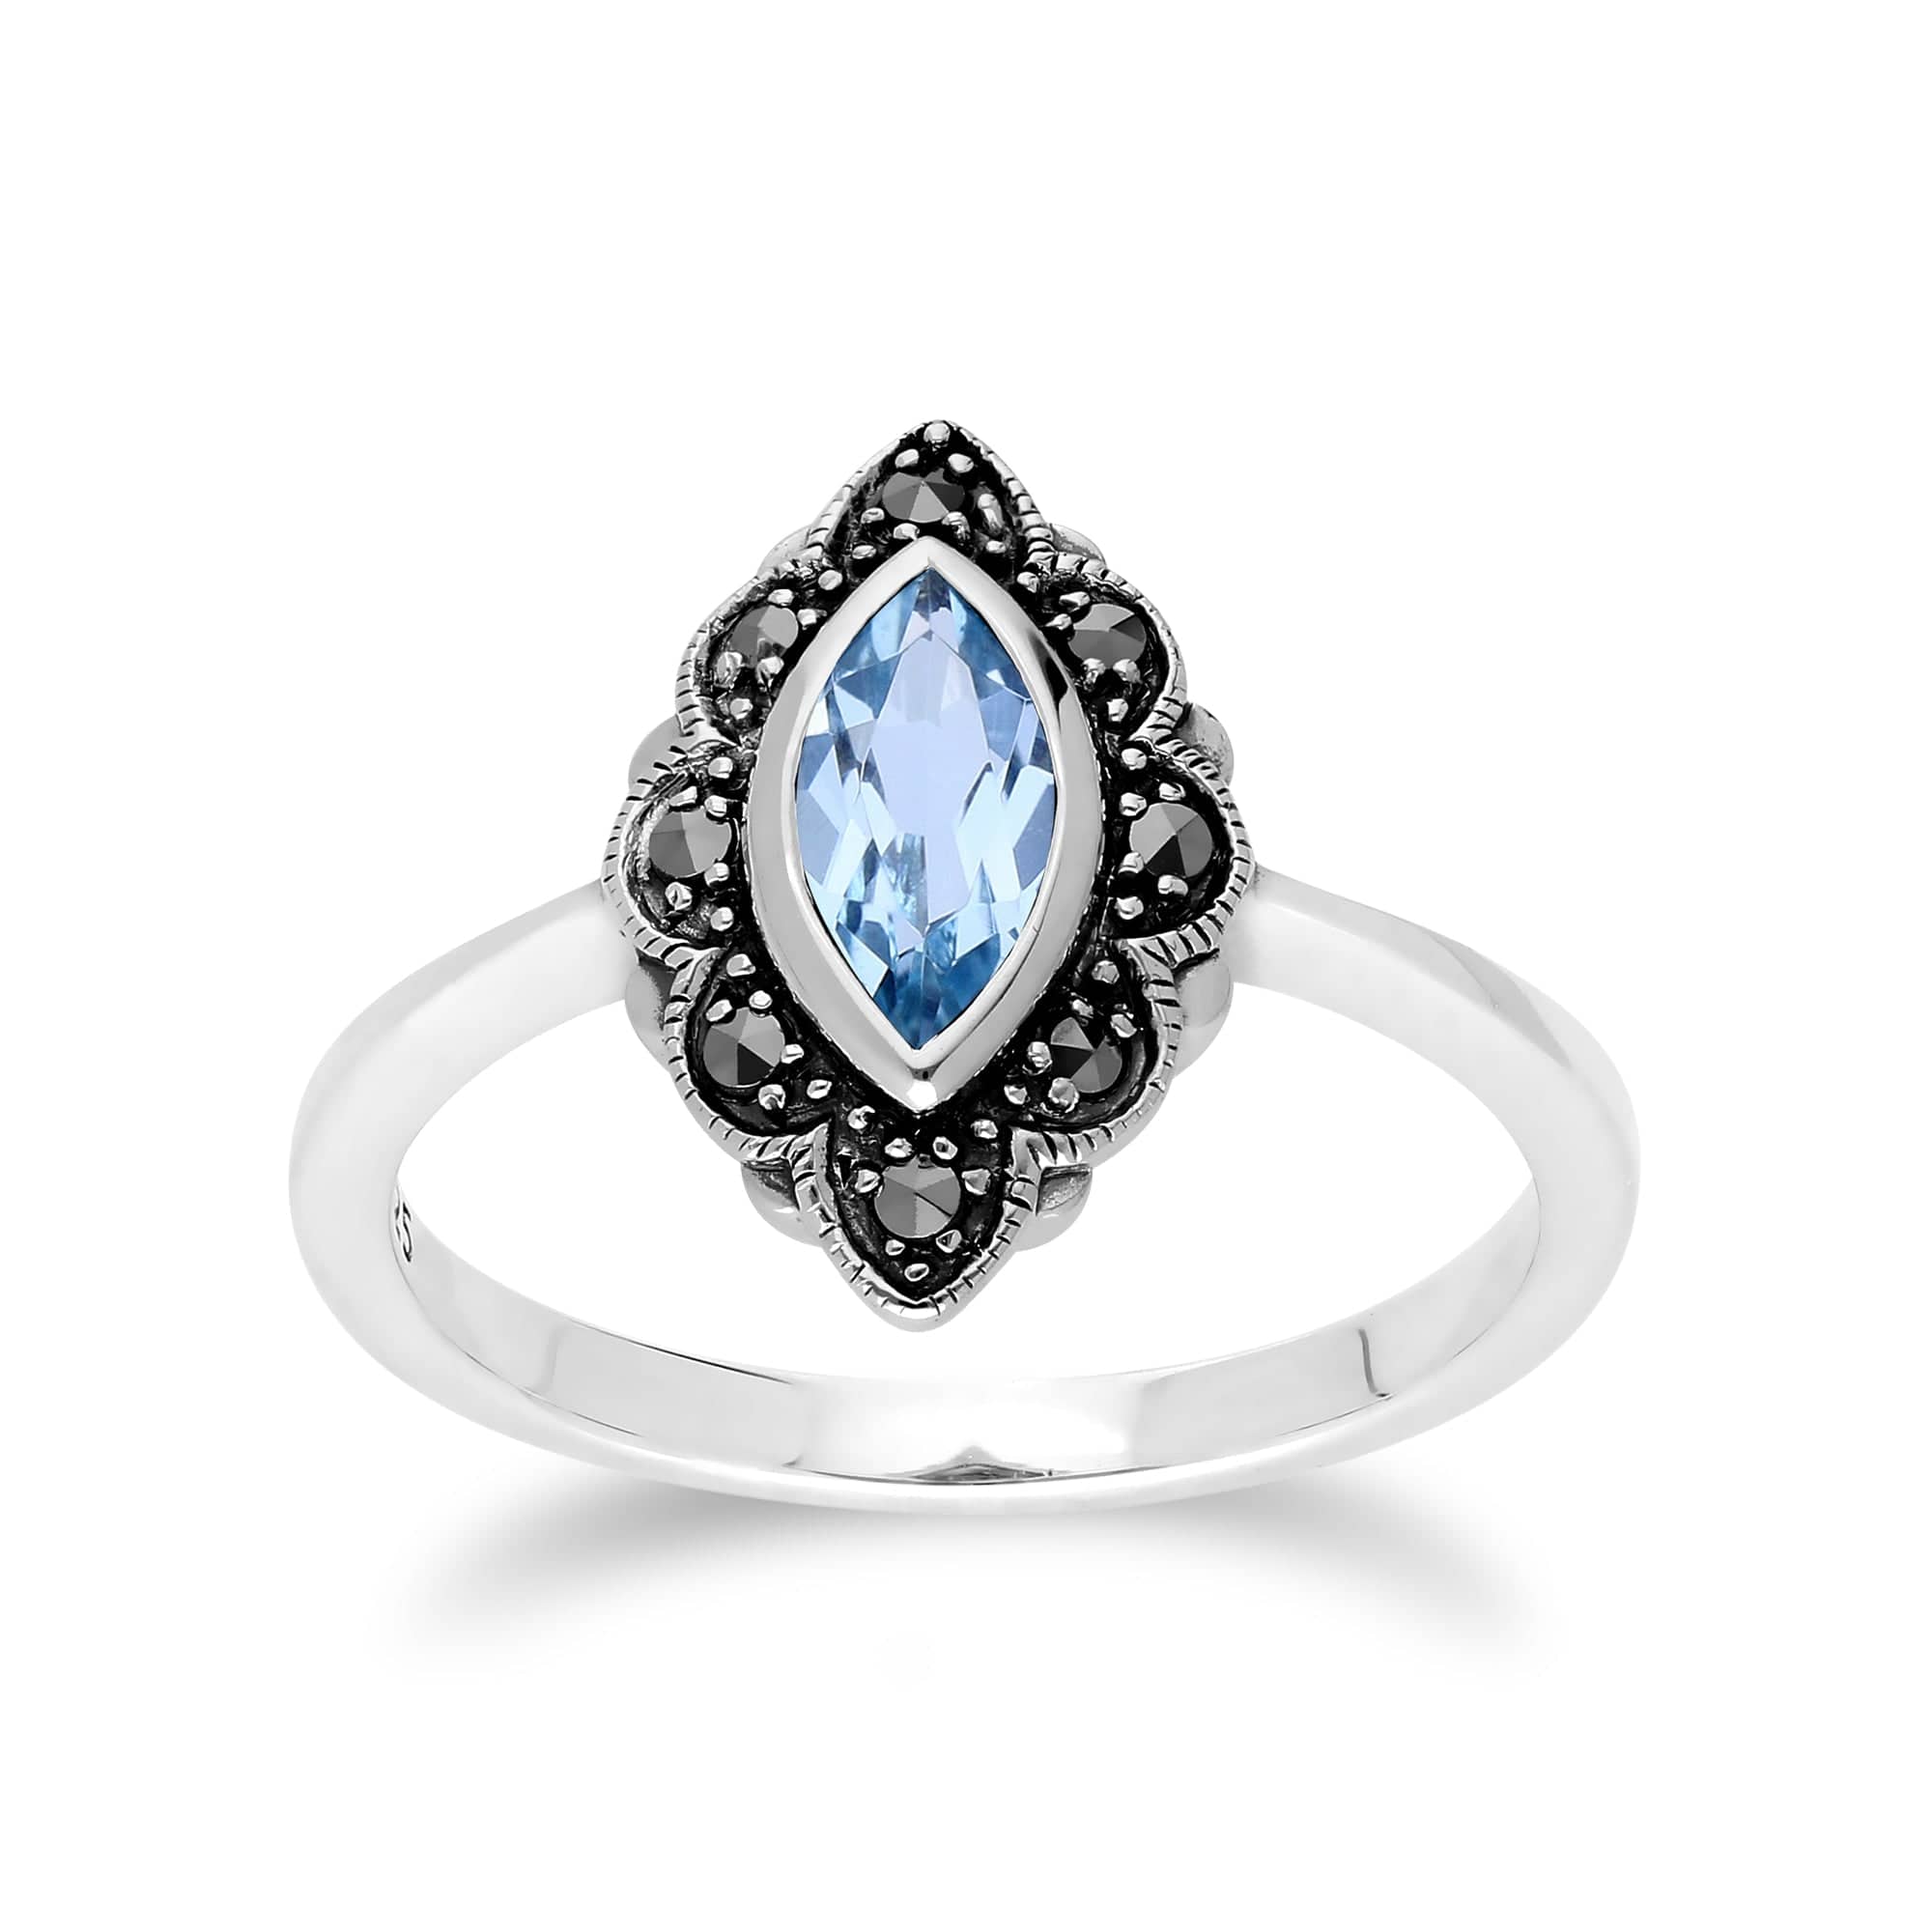 214R597202925 Art Nouveau Marquise Blue Topaz & Marcasite Leaf Ring in 925 Sterling Silver 1